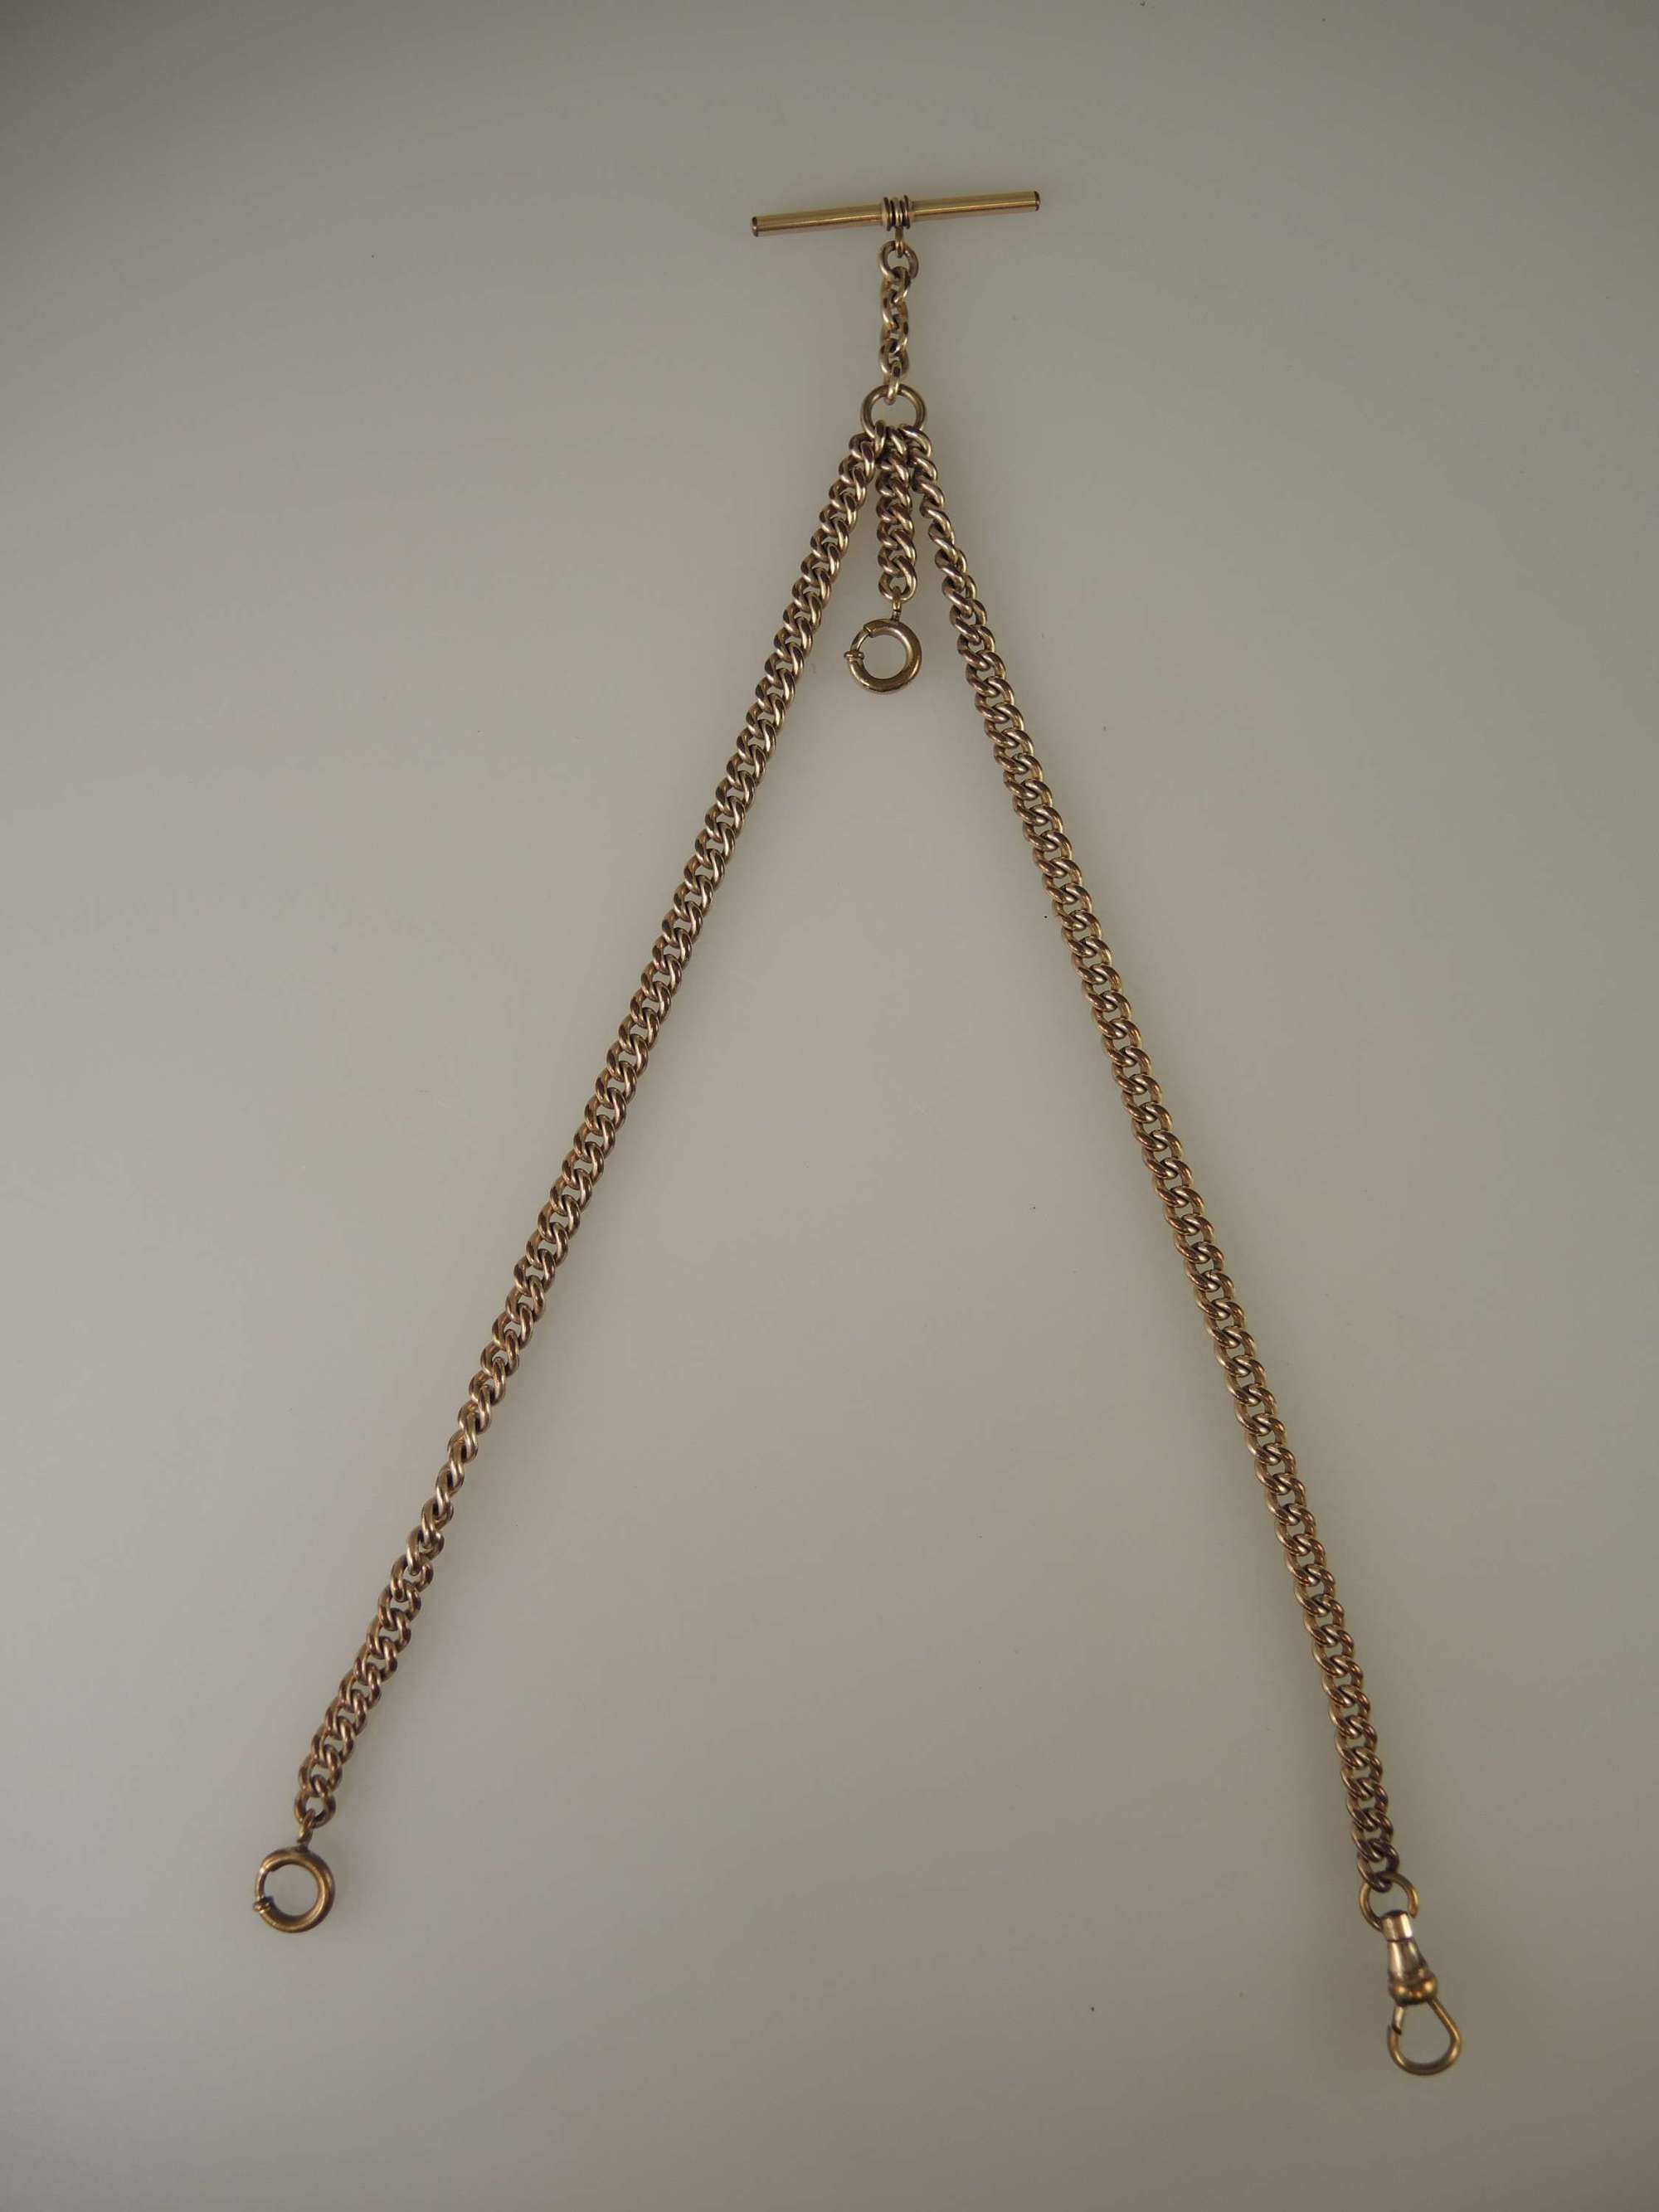 Victorian gold plated double pocket watch chain c1890